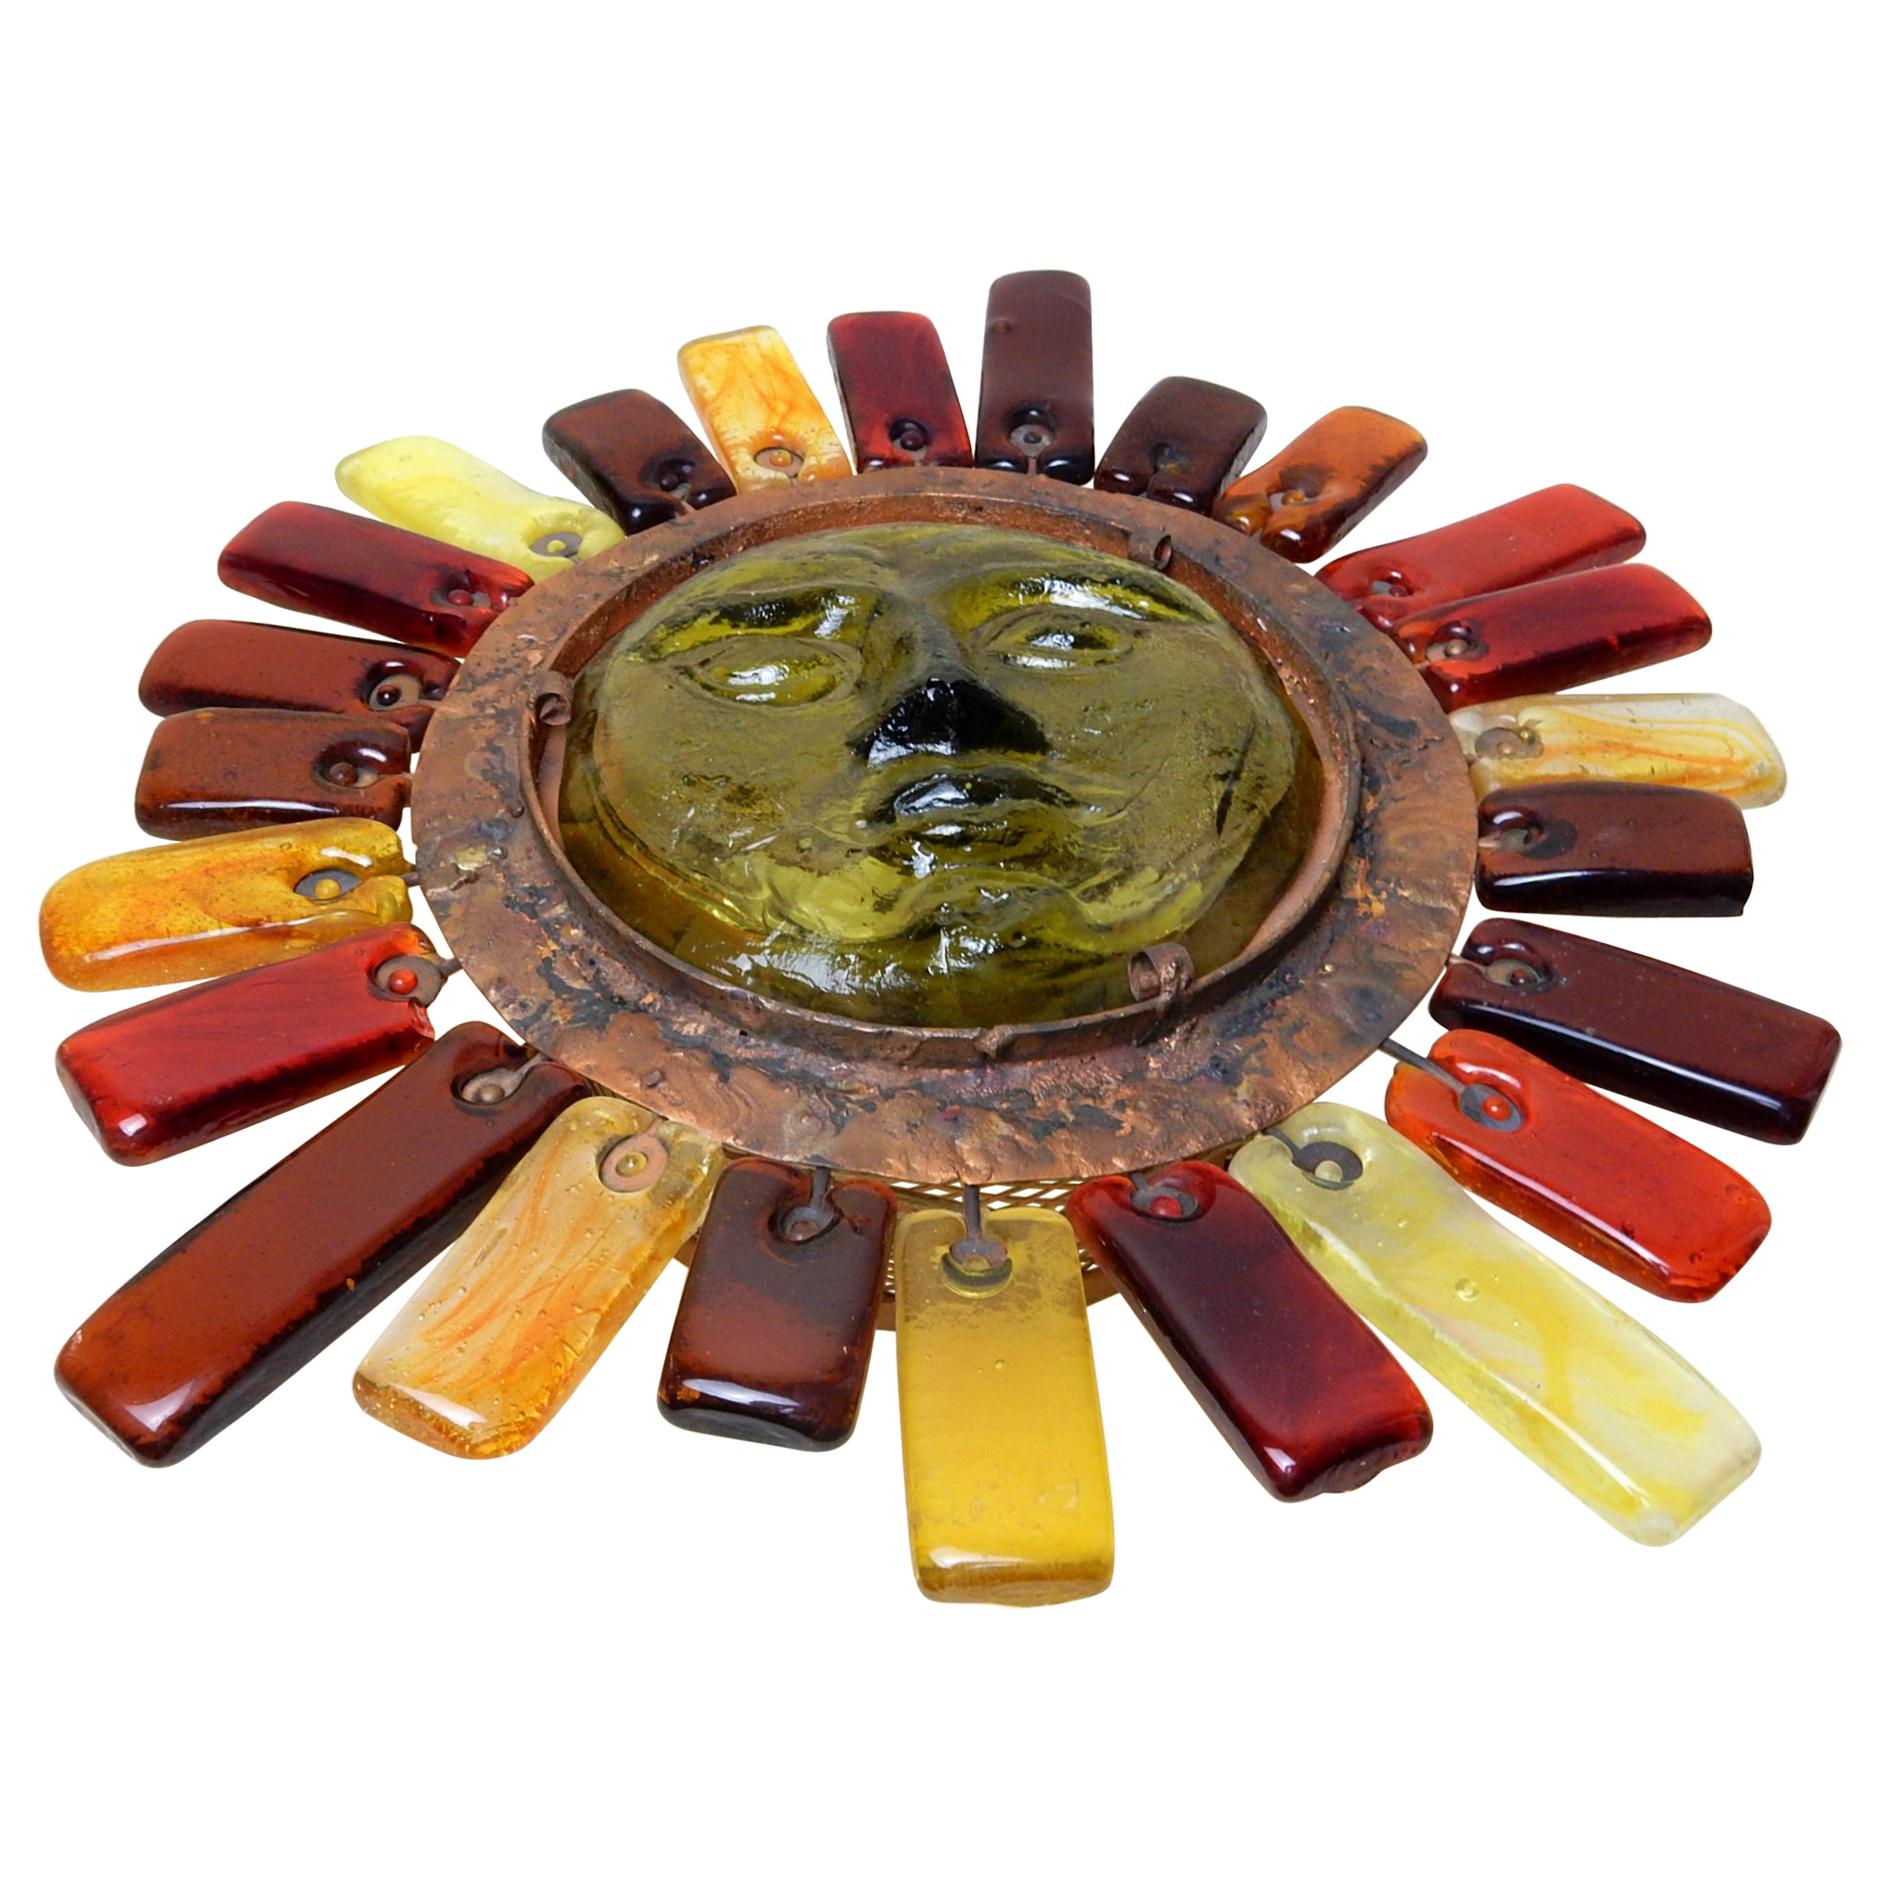 Rare example of this art glass sun sconce lamp designed by Felipe Derflingher for Feders, circa 1960s
Handcrafted with amazing colored glass 